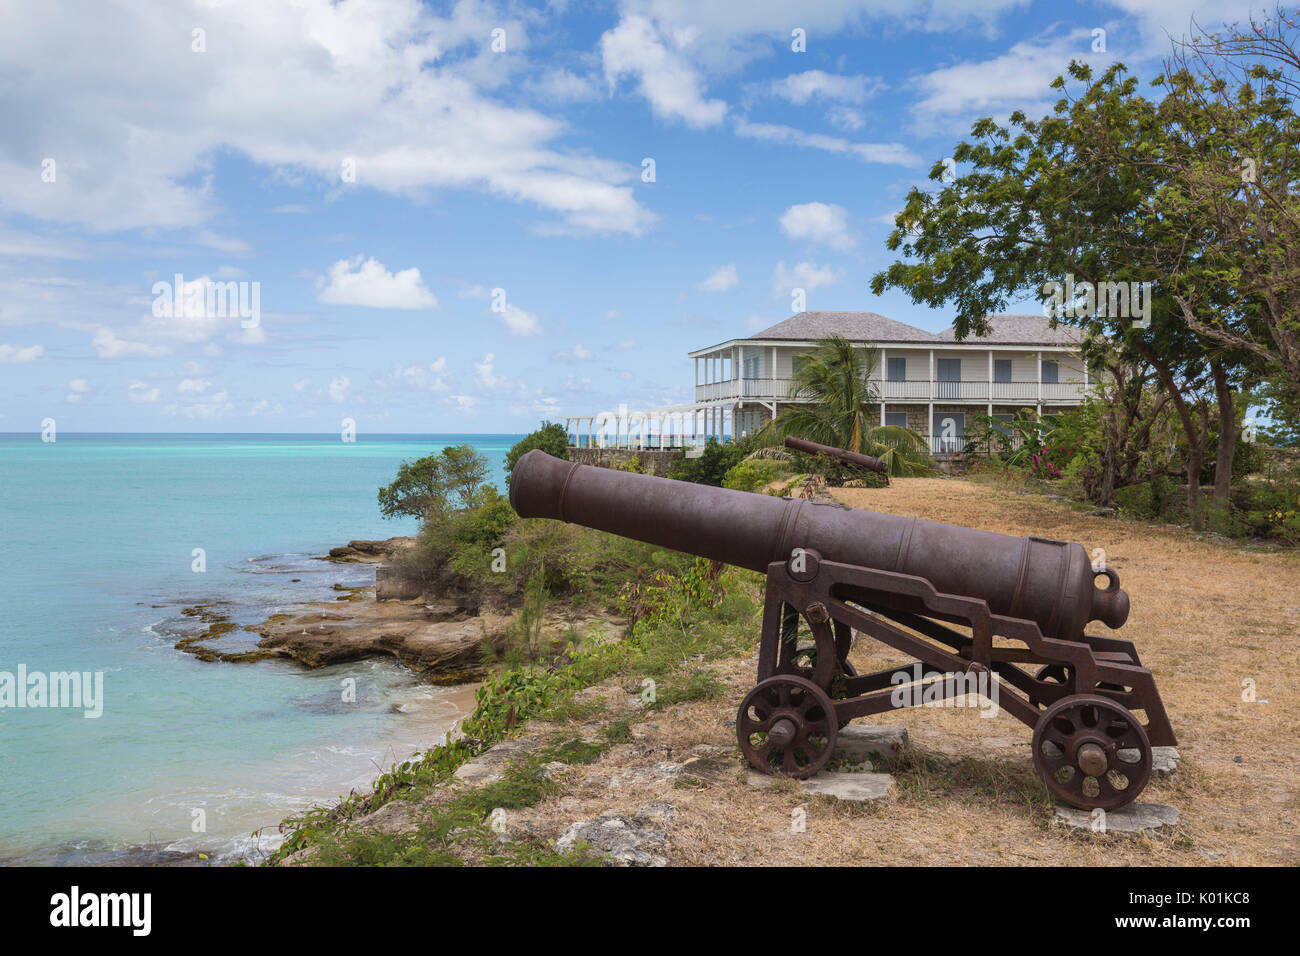 The cannon at Fort Saint James surrounds the clear Caribbean Sea Saint John's Antigua and Barbuda Leeward Islands West Indies Stock Photo